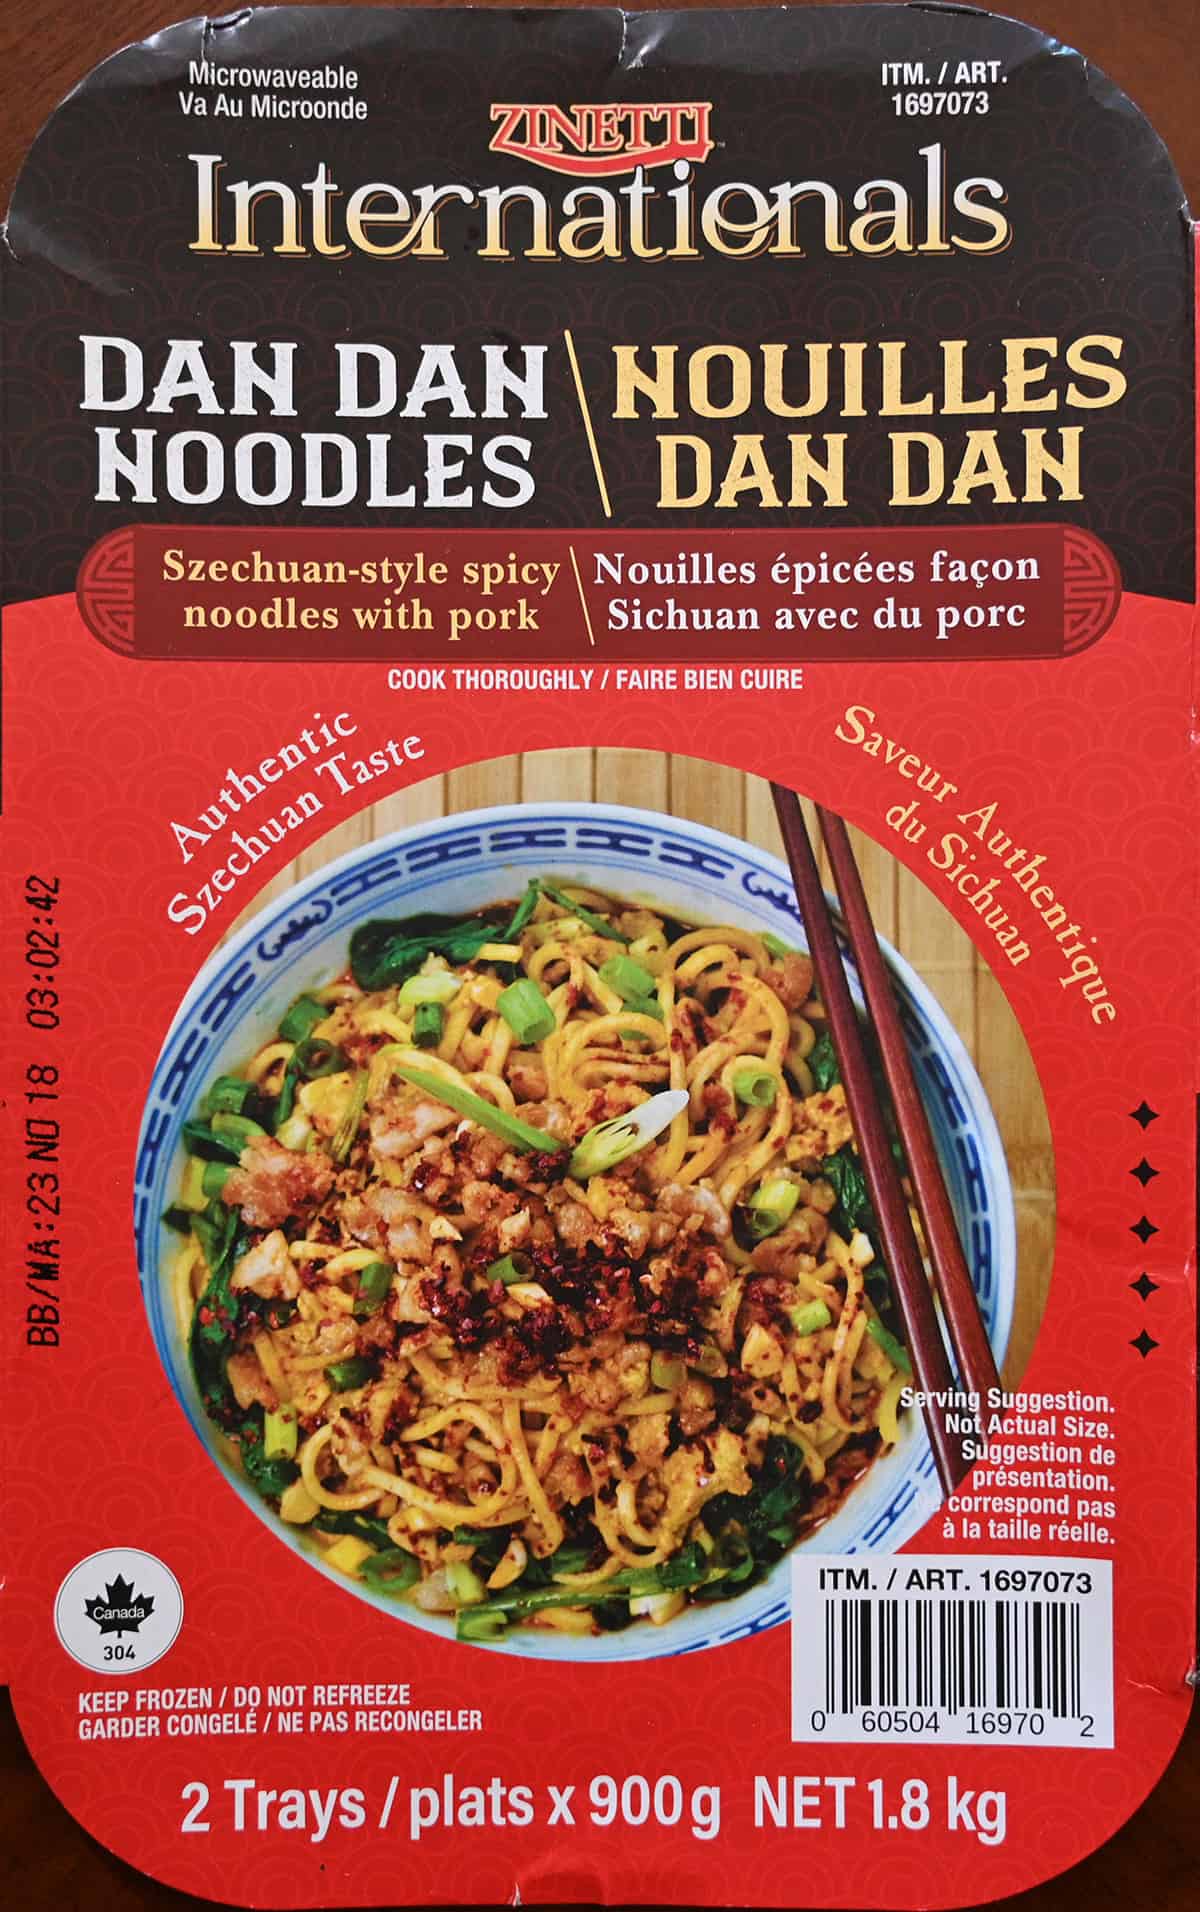 Closeup image of the front of the Zinetti International's Dan Dan Noodles front label.